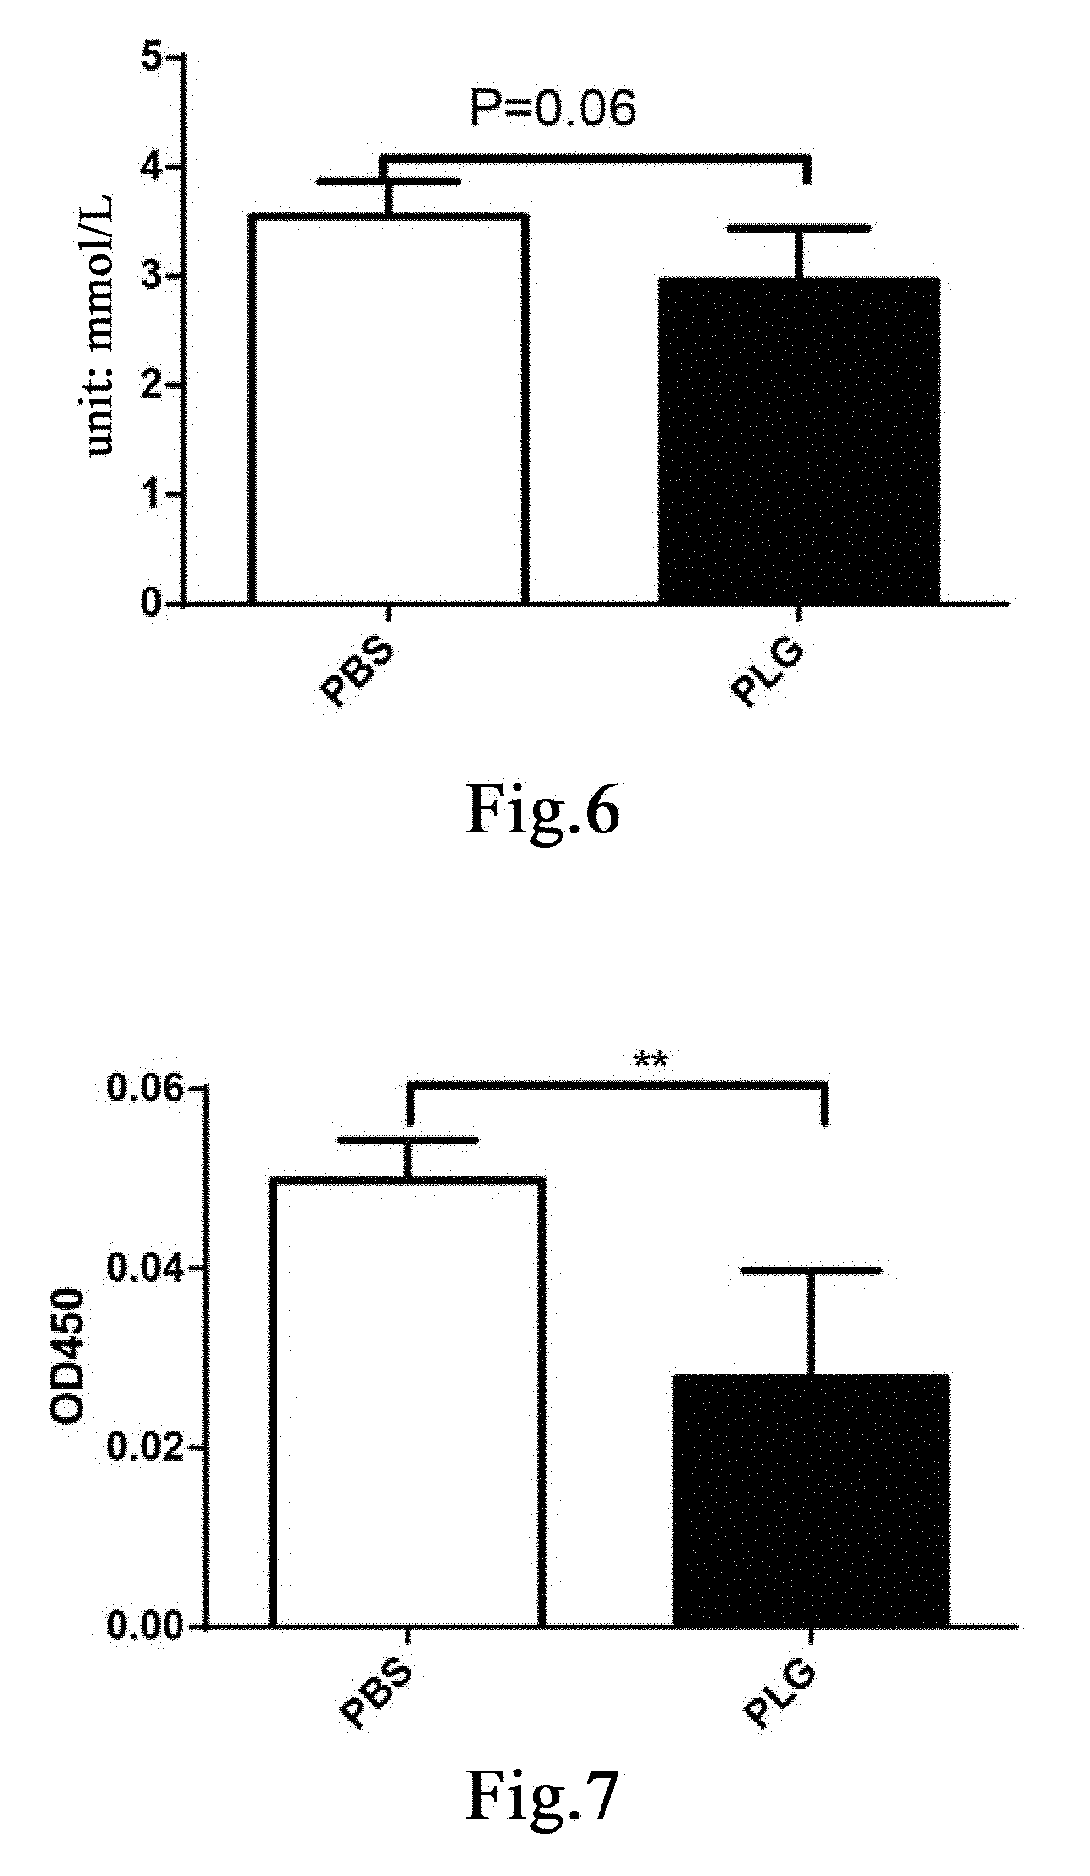 Method for making glucagon and insulin restore normal balance